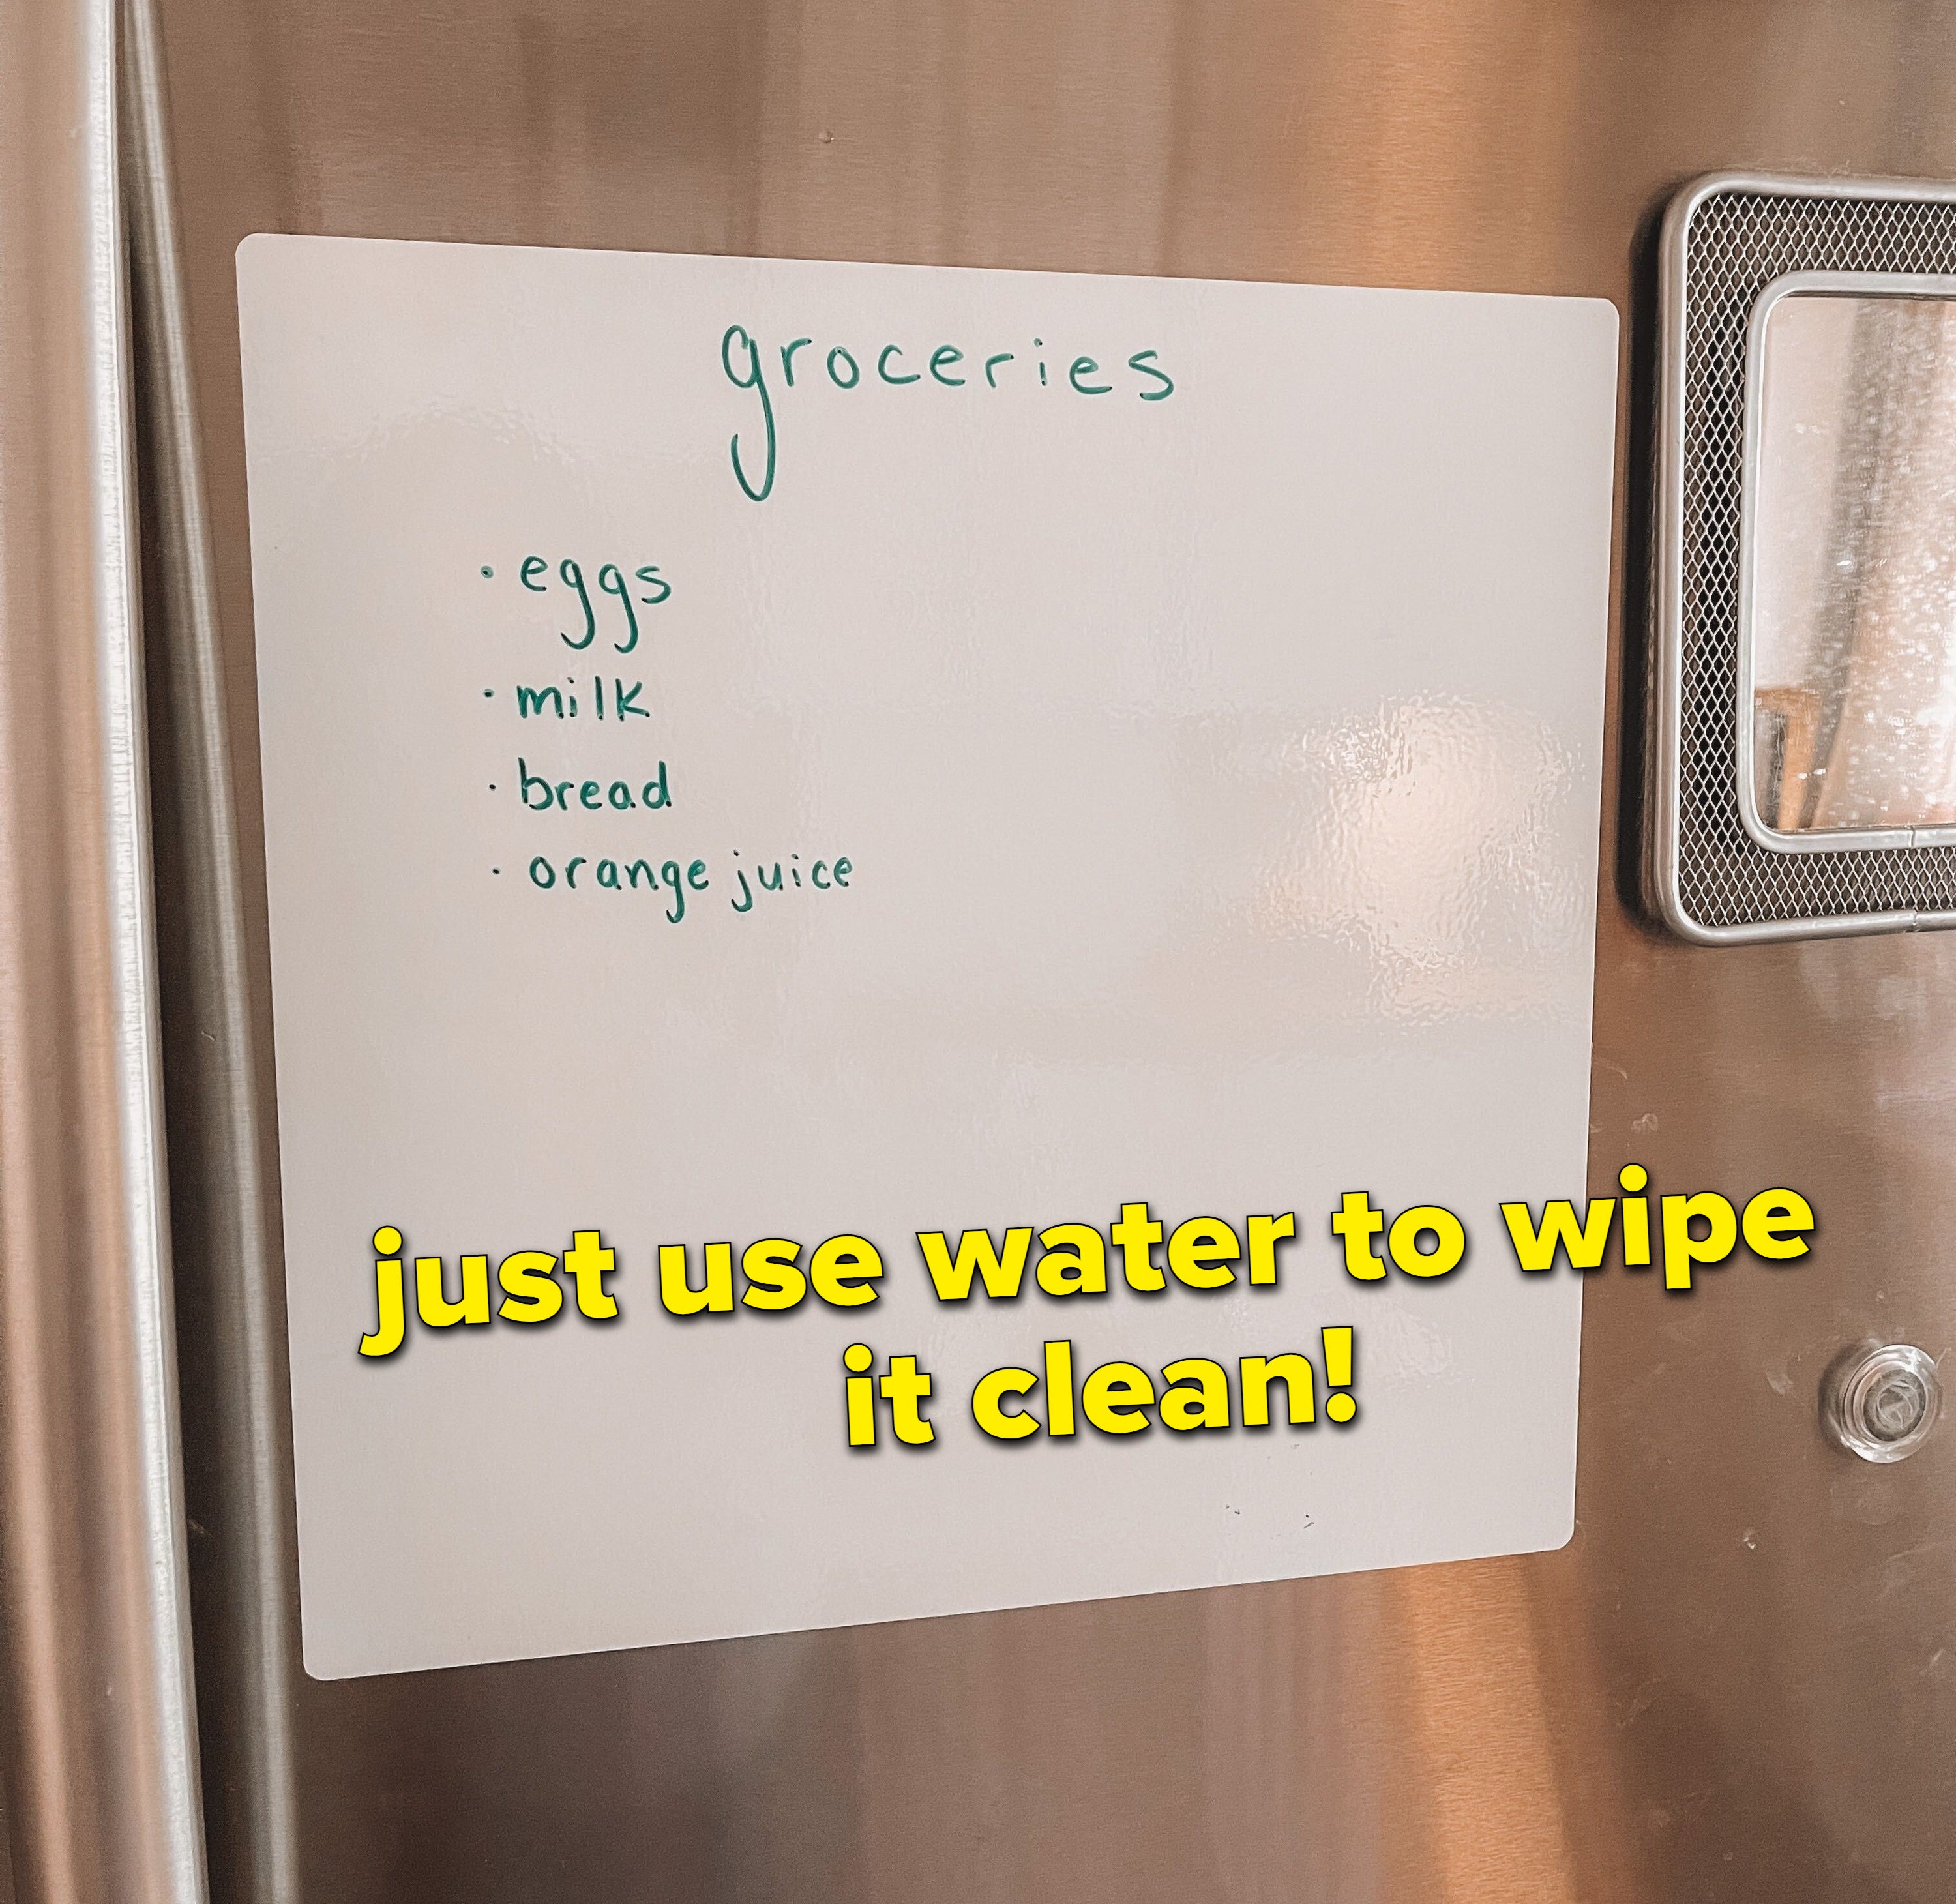 The white board on a stainless steel fridge that says &quot;groceries: eggs, milk, bread, and orange juice&quot; in list format